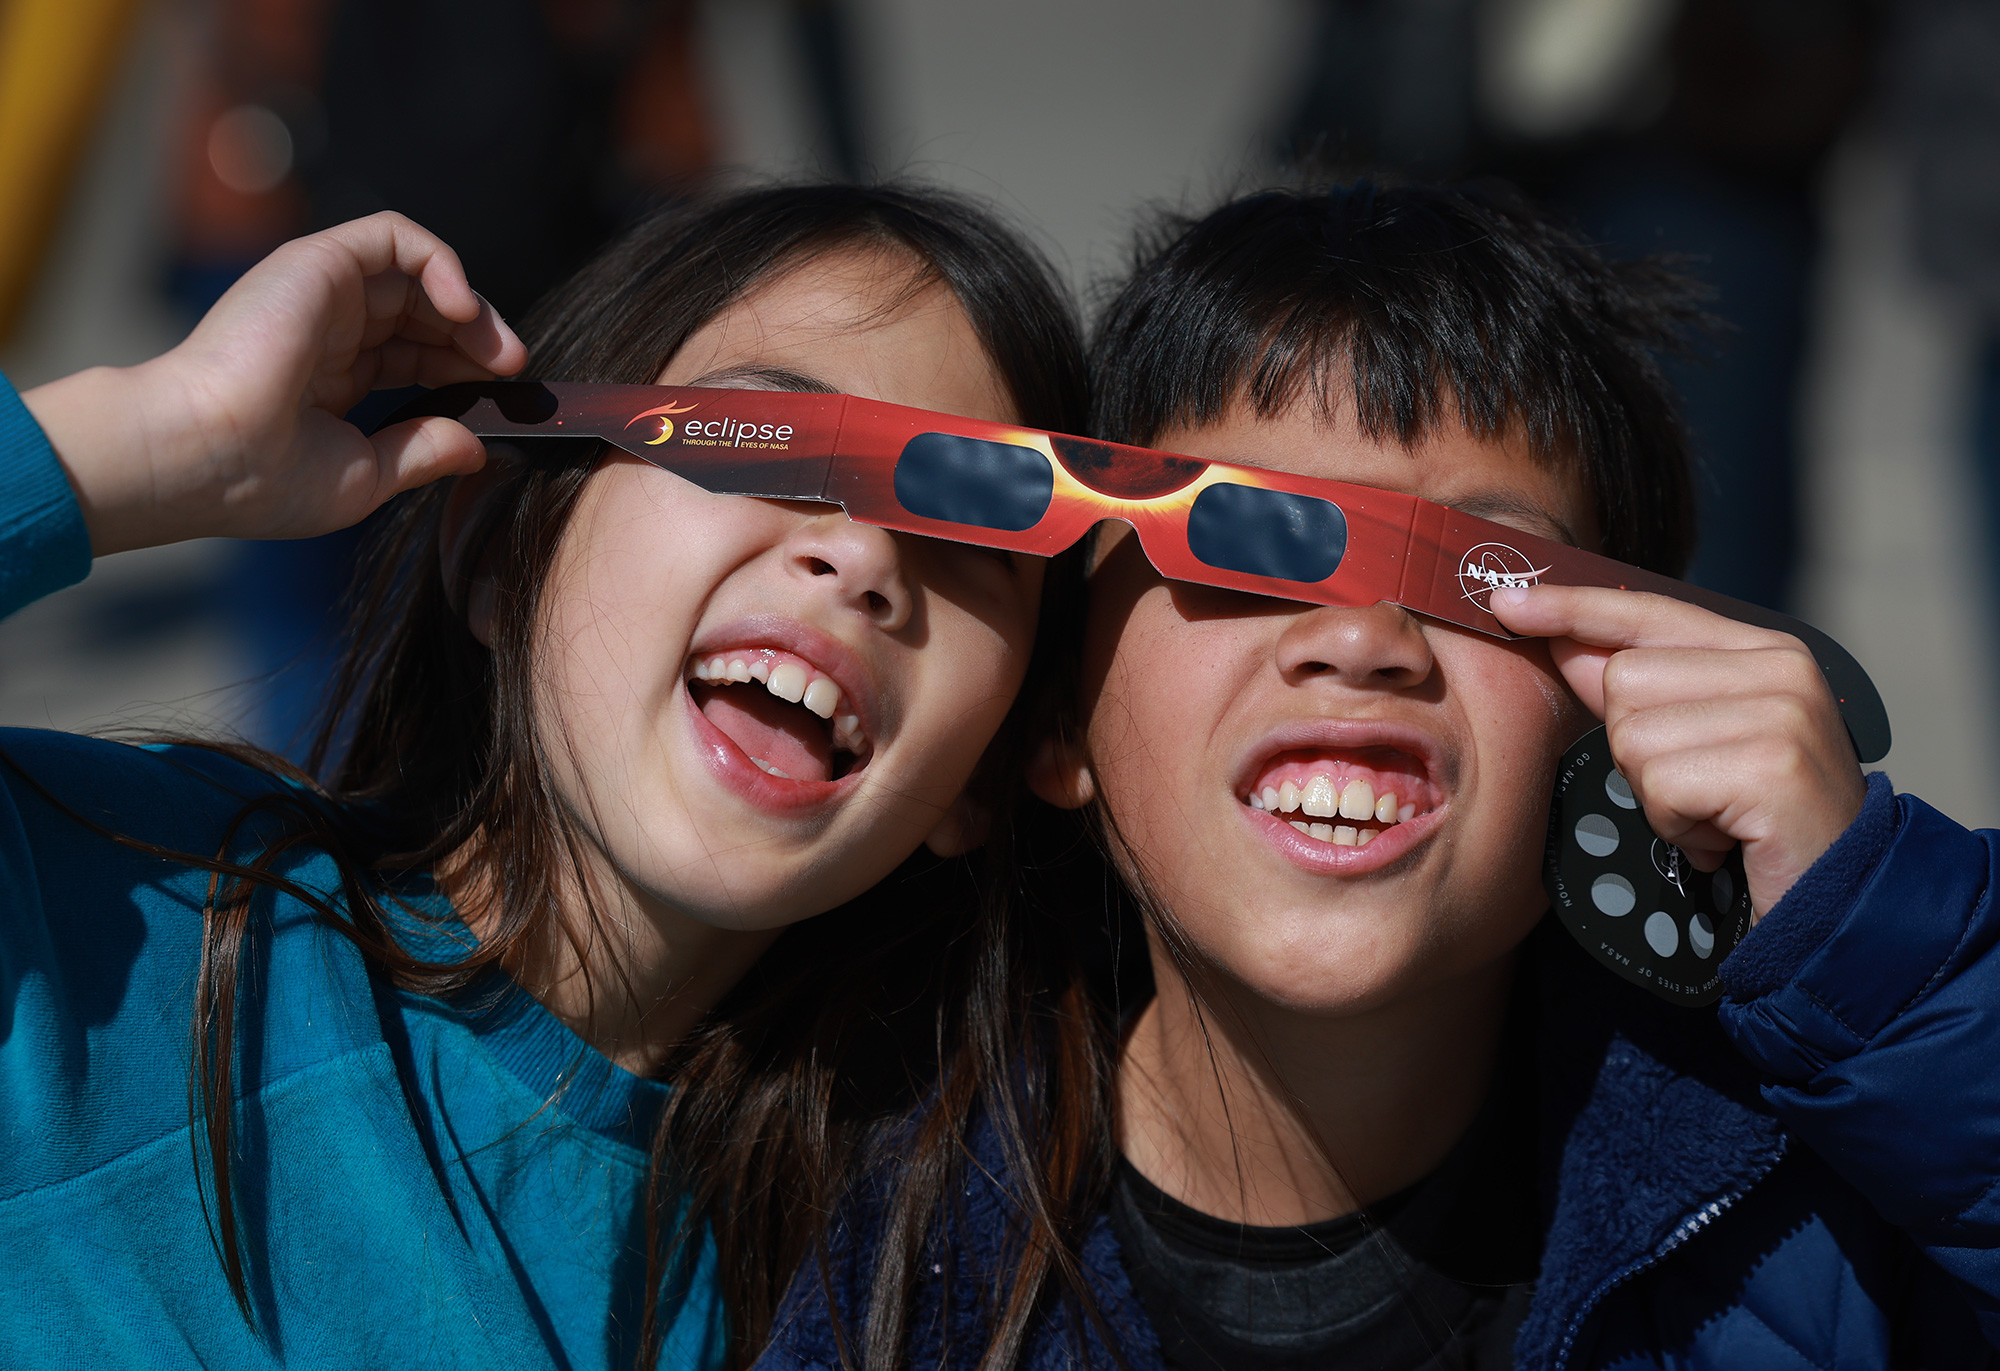 Miriam and Oliver Toy share a pair of eclipse glasses as they await the eclipse in Houlton, Maine. 